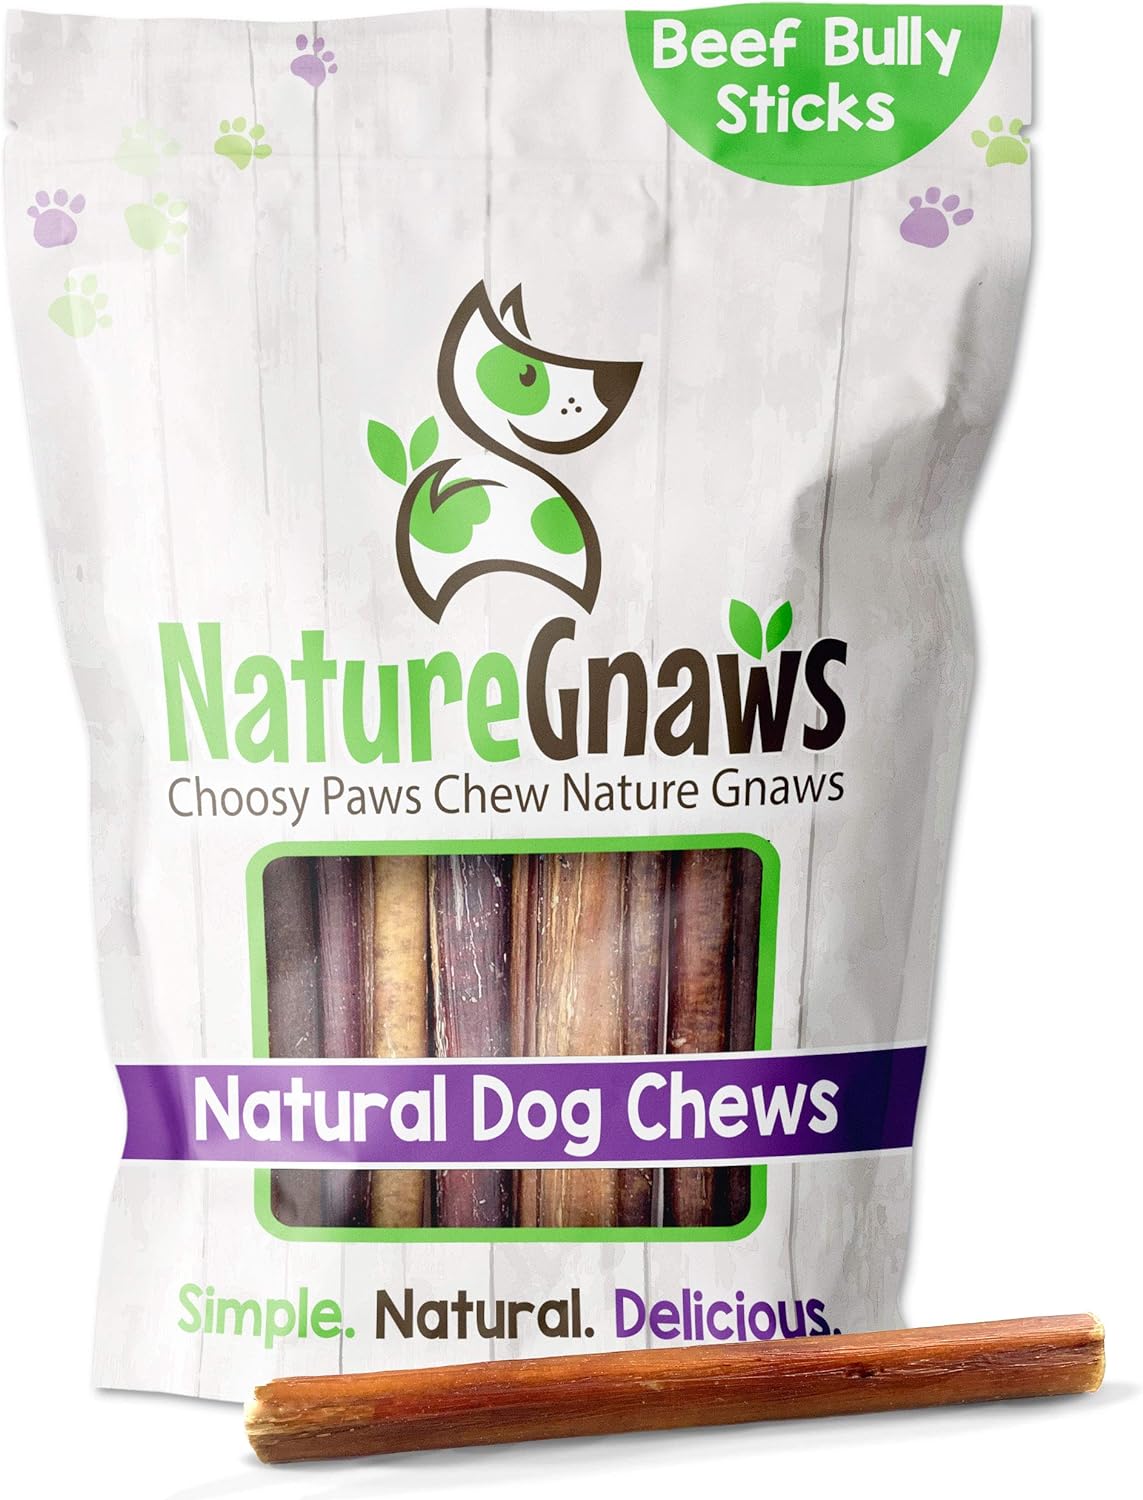 Nature Gnaws Bully Sticks for Dogs - Premium Natural Beef Dental Bones - Long Lasting Dog Chew Treats for Aggressive Chewers - Rawhide Free - 5-6 Inch